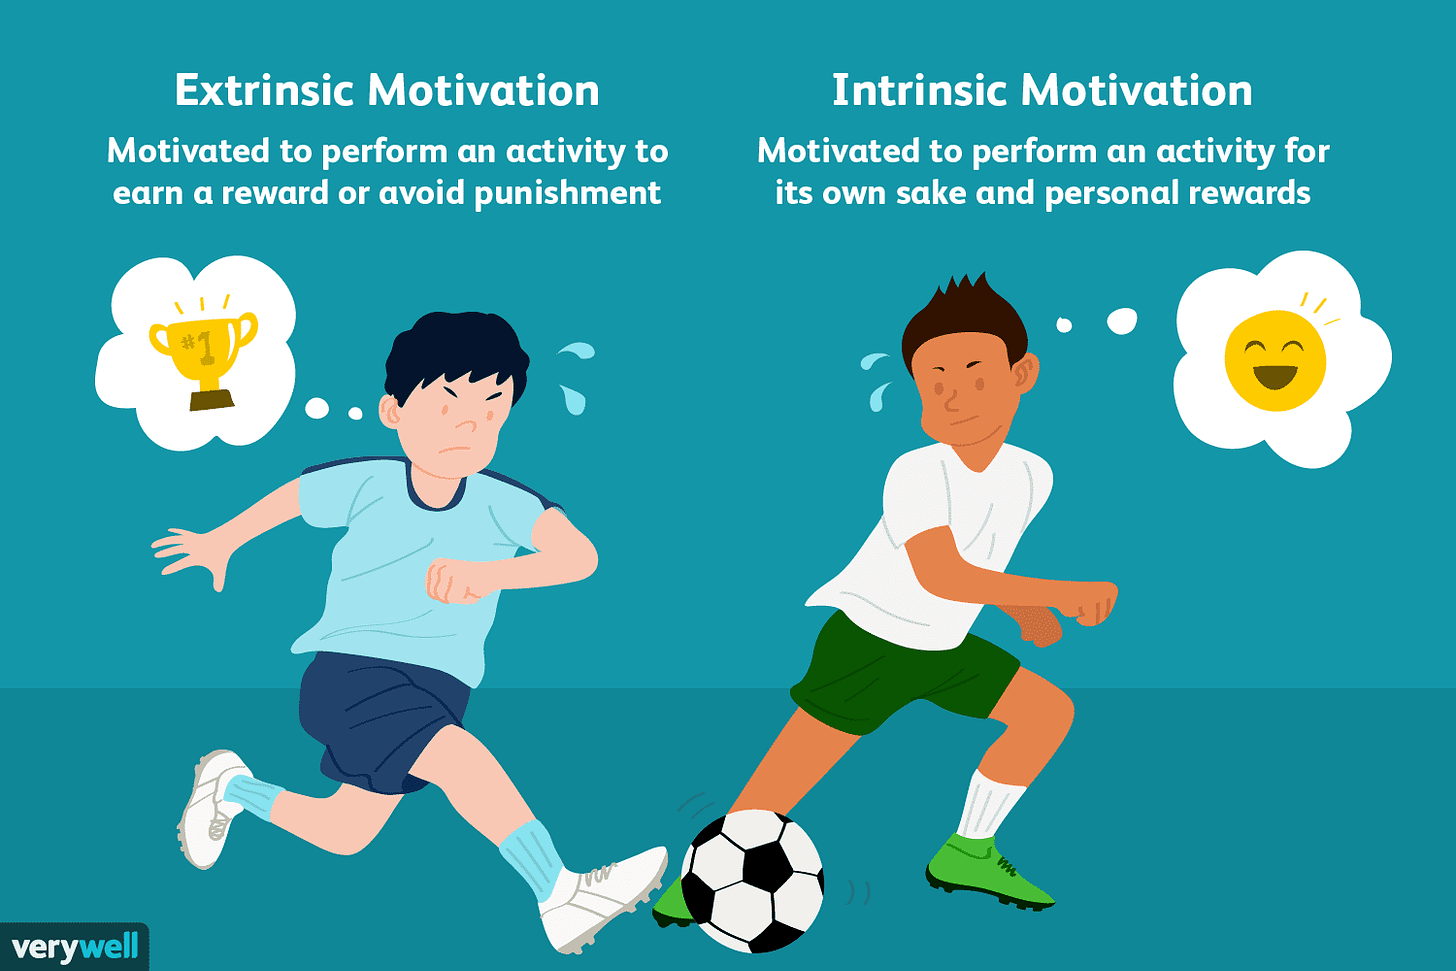 Extrinsic vs. Intrinsic Motivation: What's the Difference?